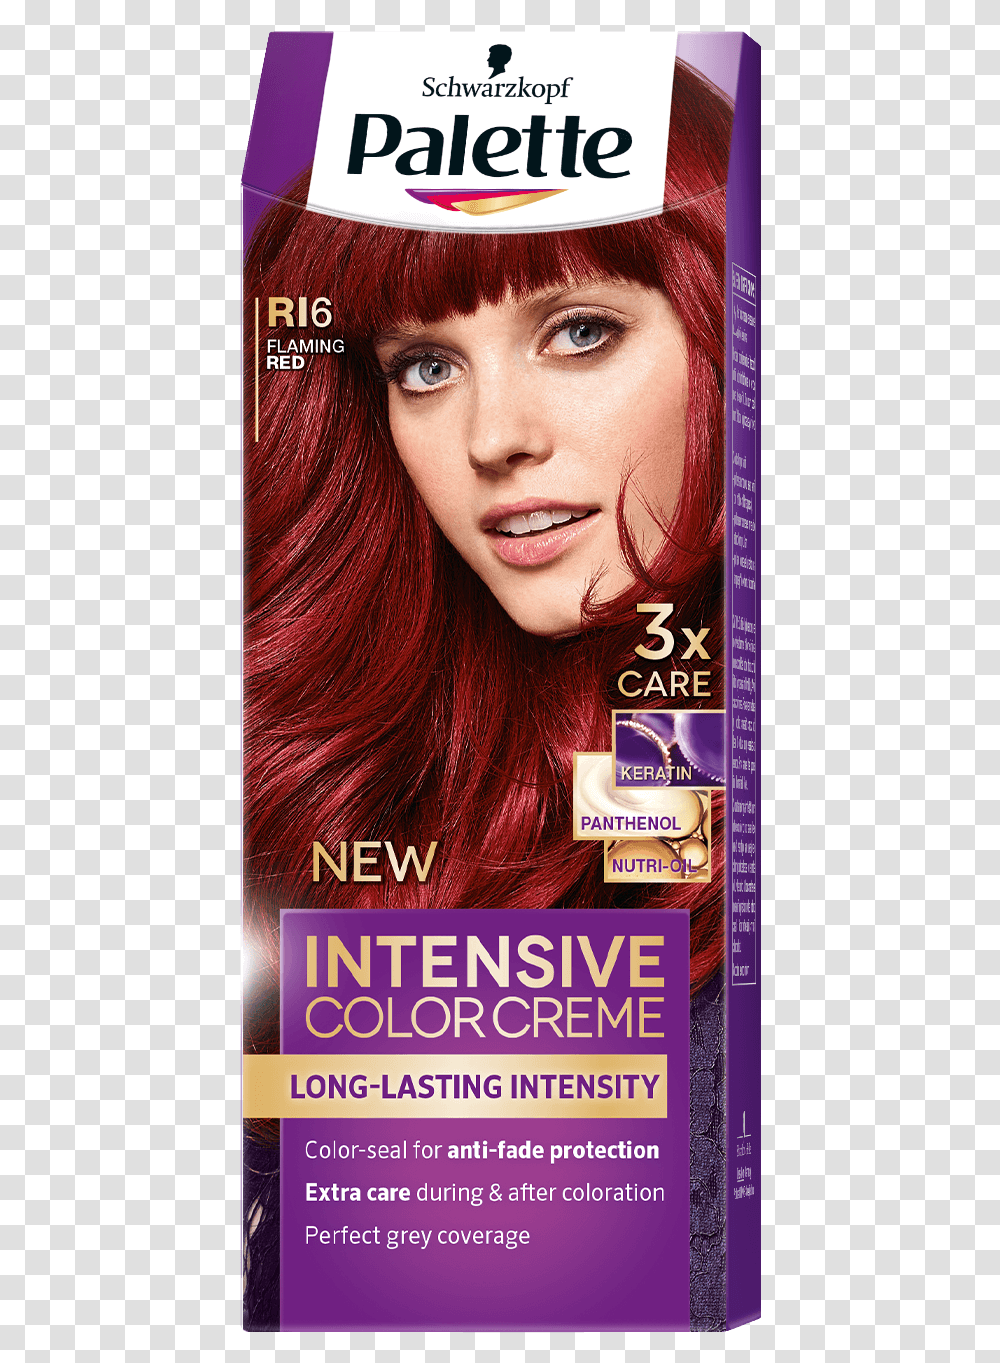 Palette Com Icc Flaming Reds Ri6 Flaming Red Palette Hair Color Ash Blonde, Person, Poster, Advertisement, Flyer Transparent Png